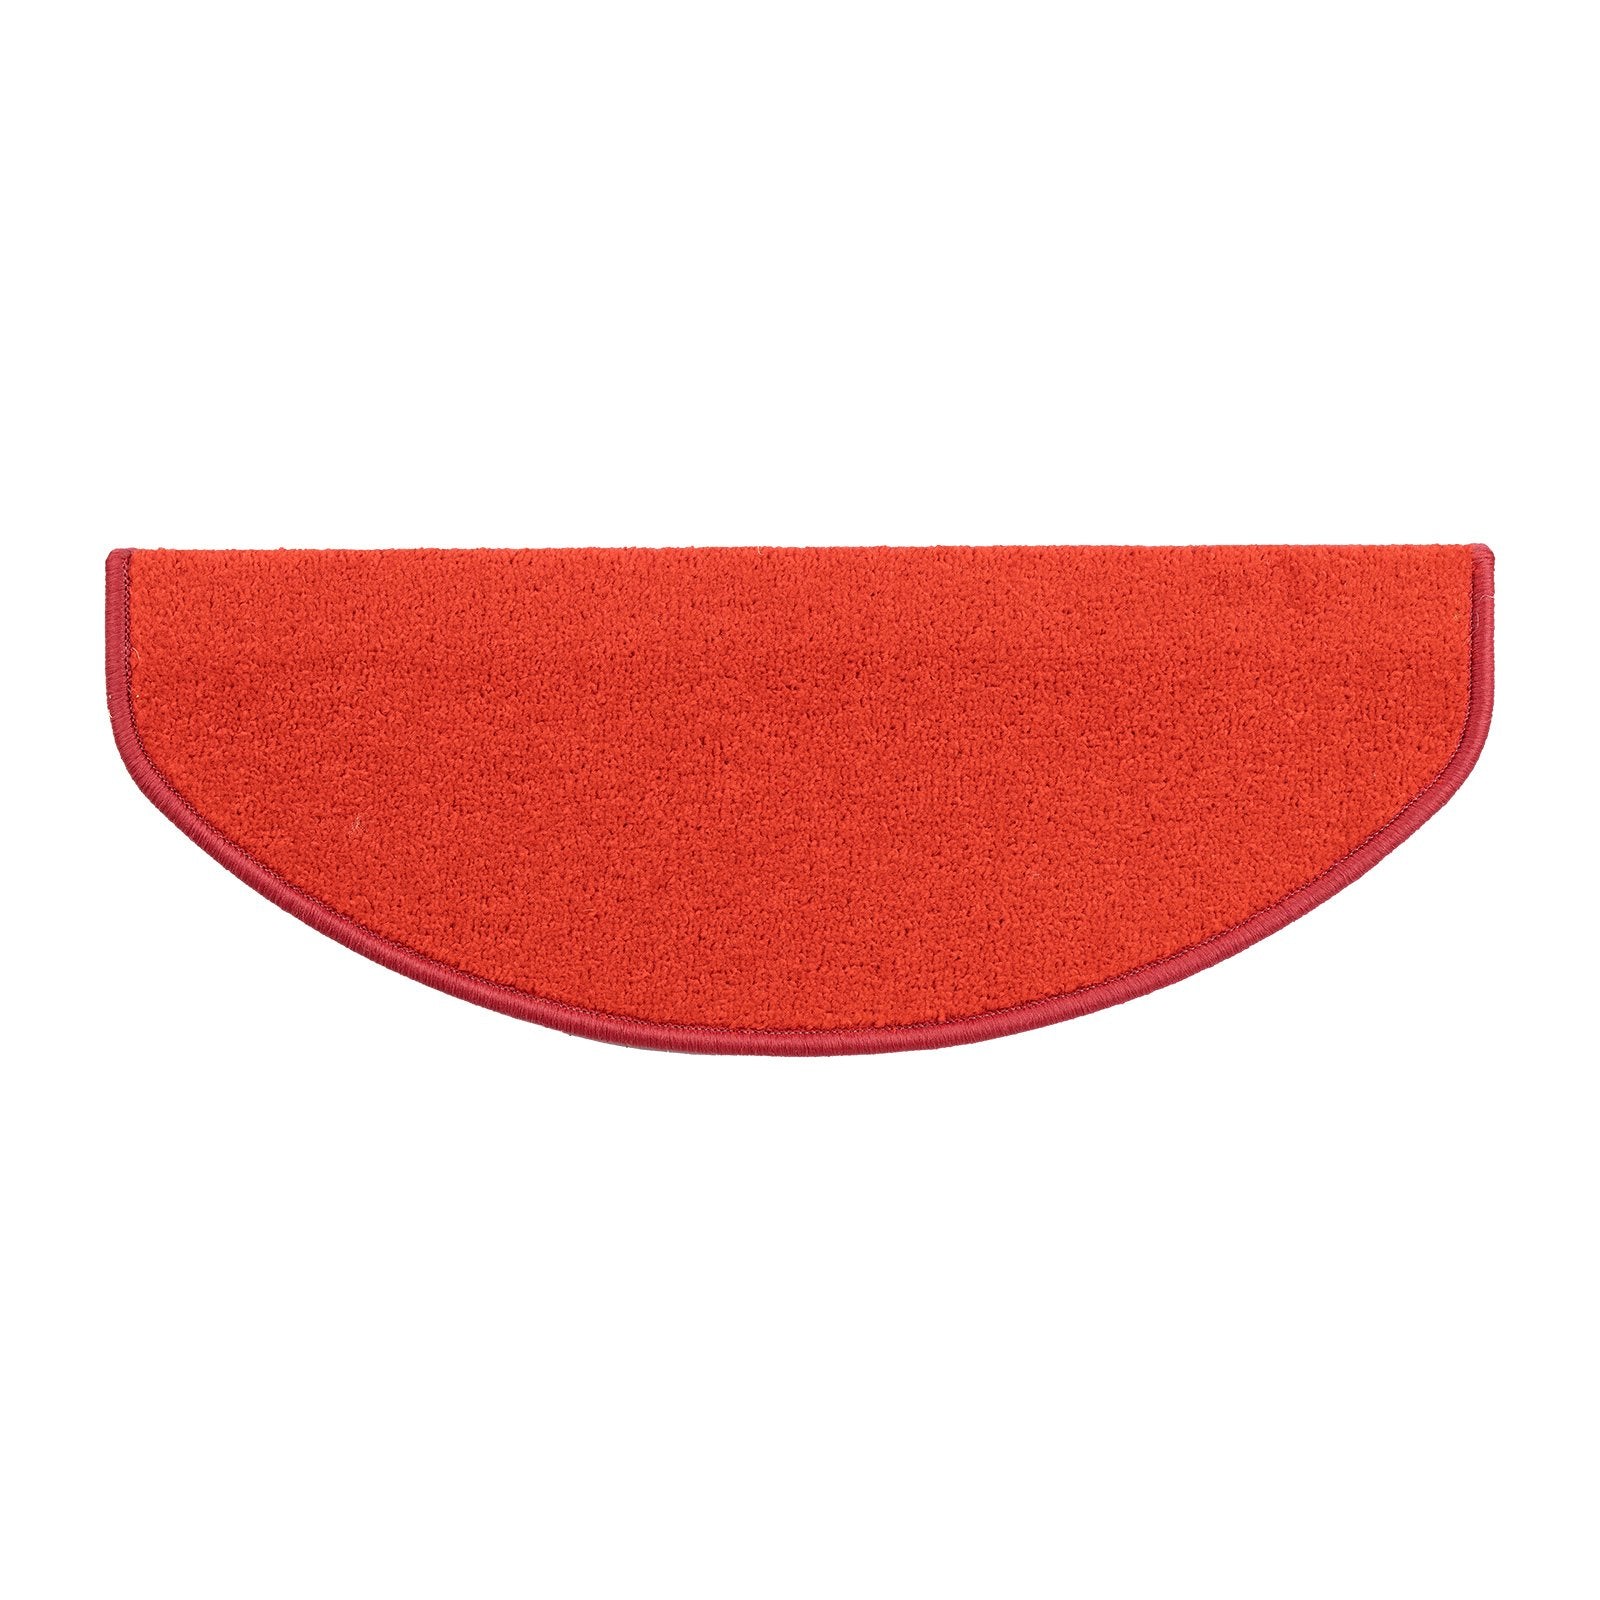 F4_fd-18510,fd-29022 | Rouge | Semicirculaire